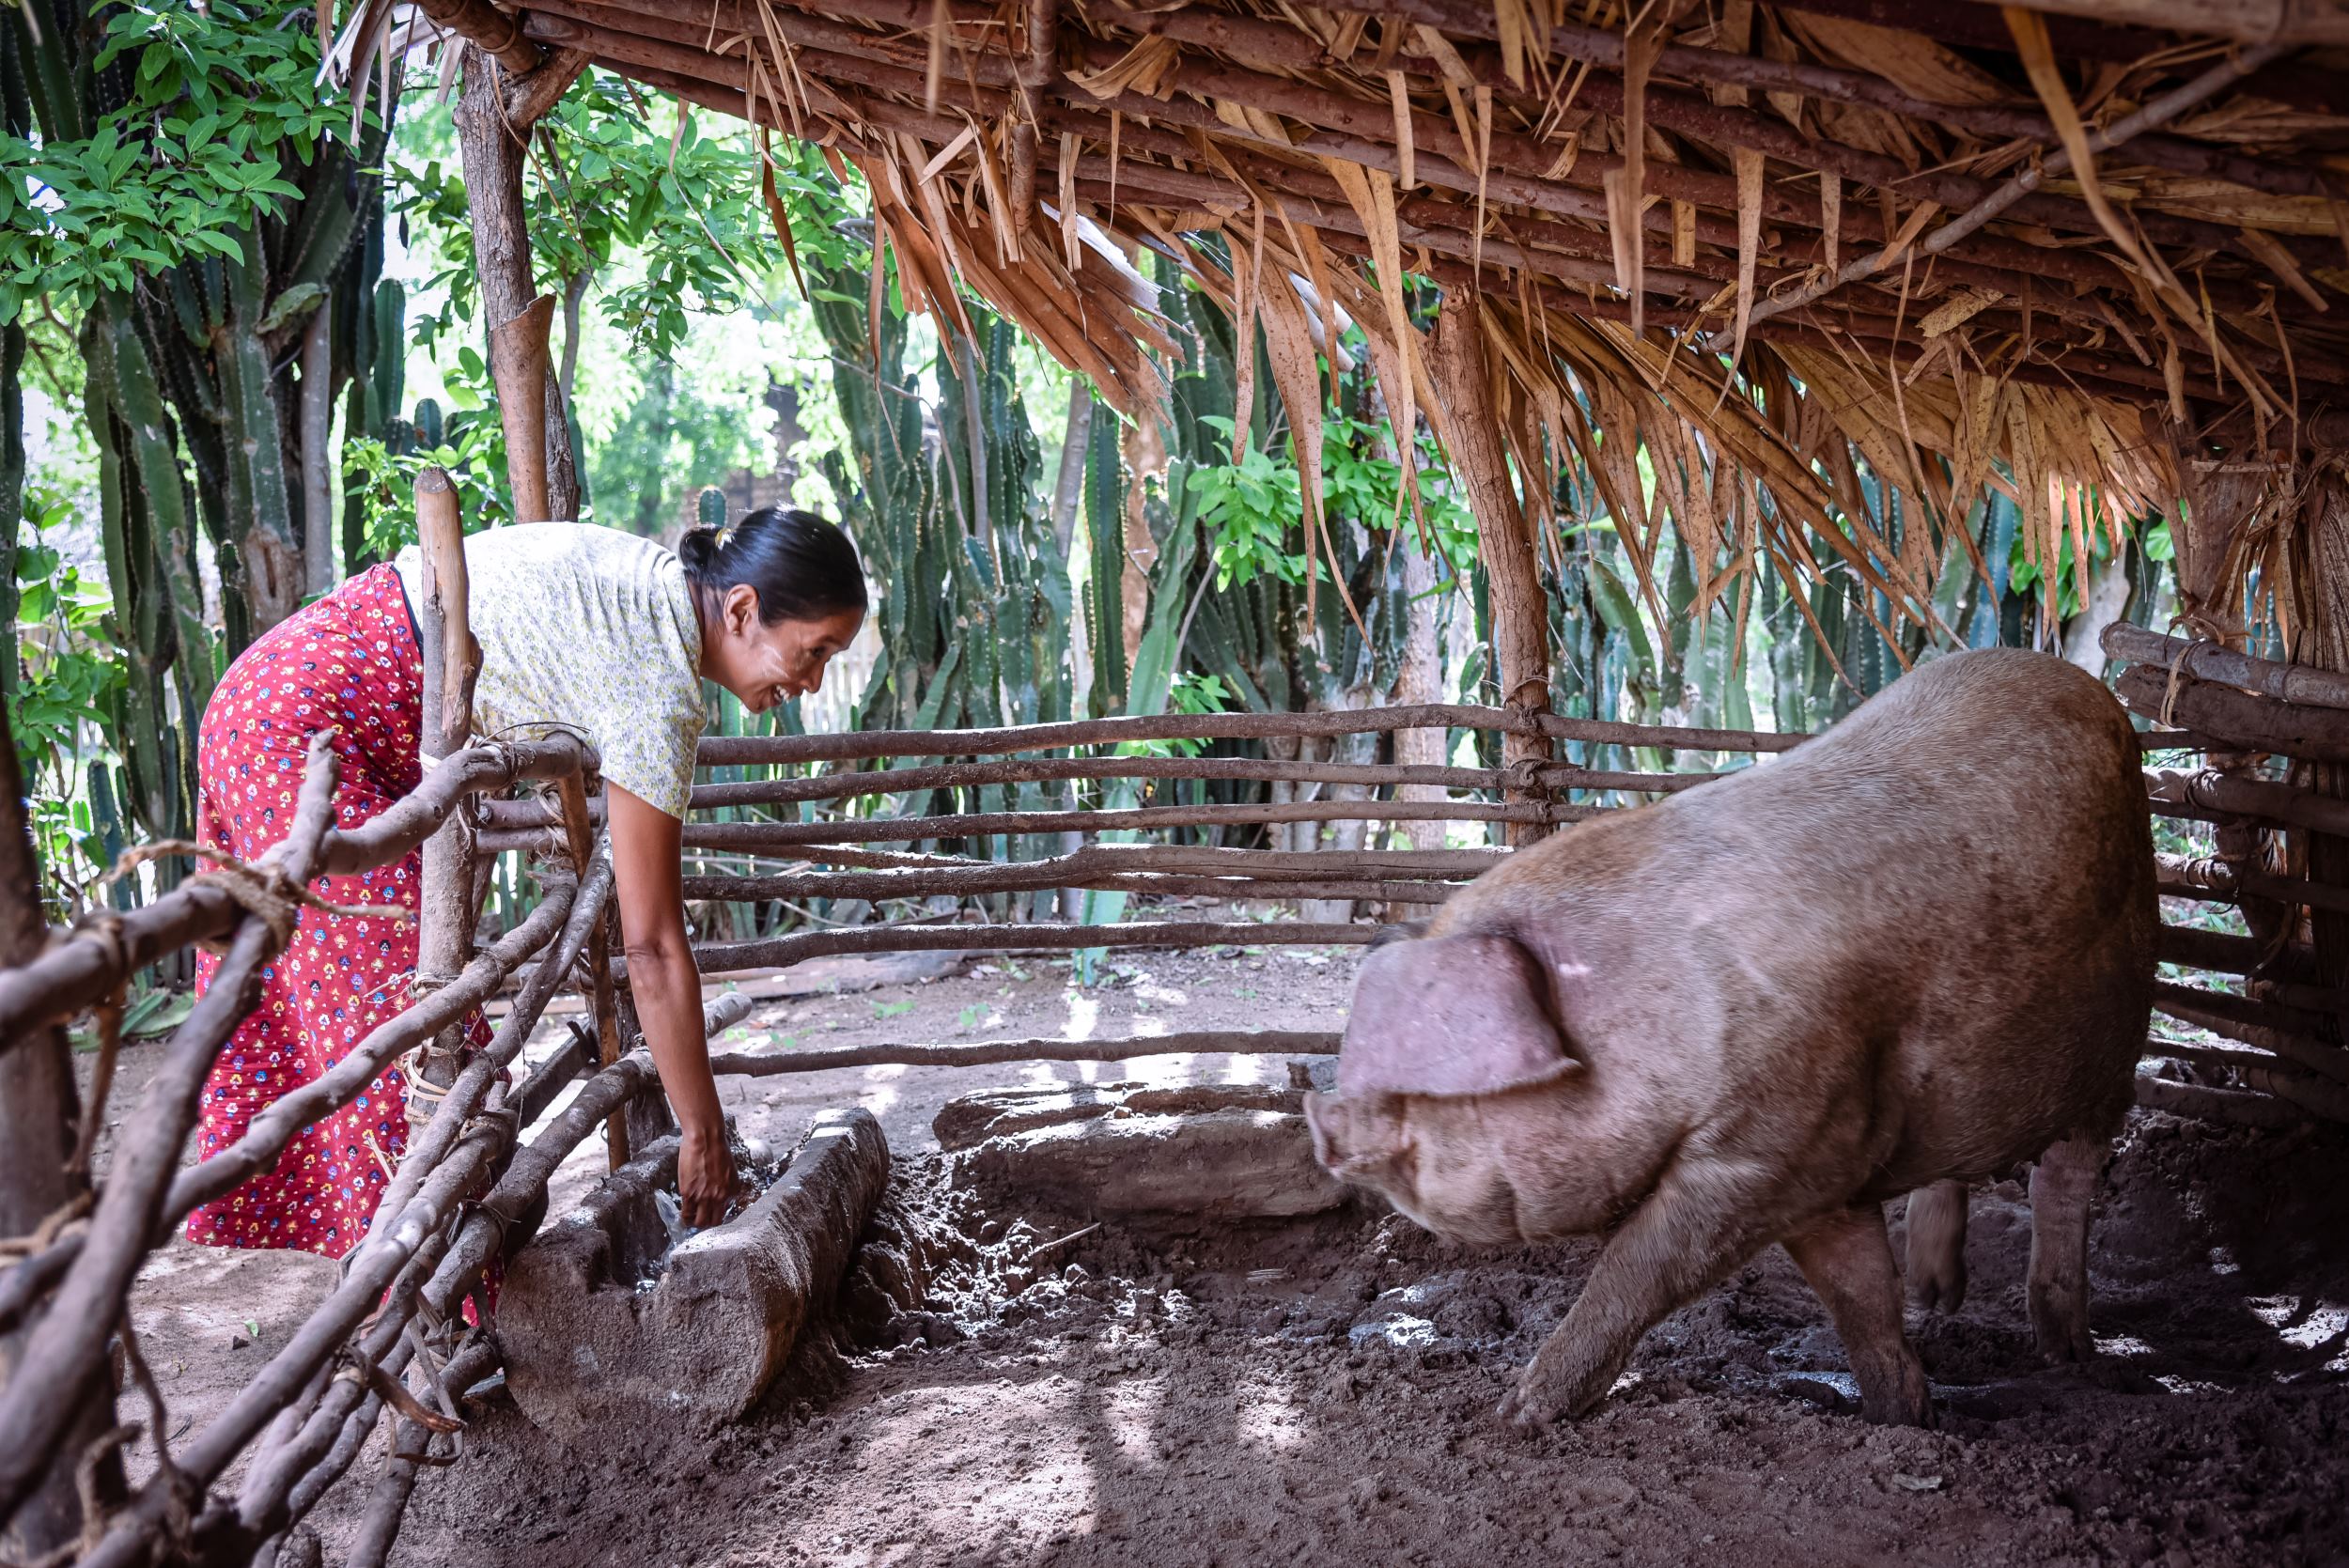 Daw Khin Cho Win with her fully grown pig